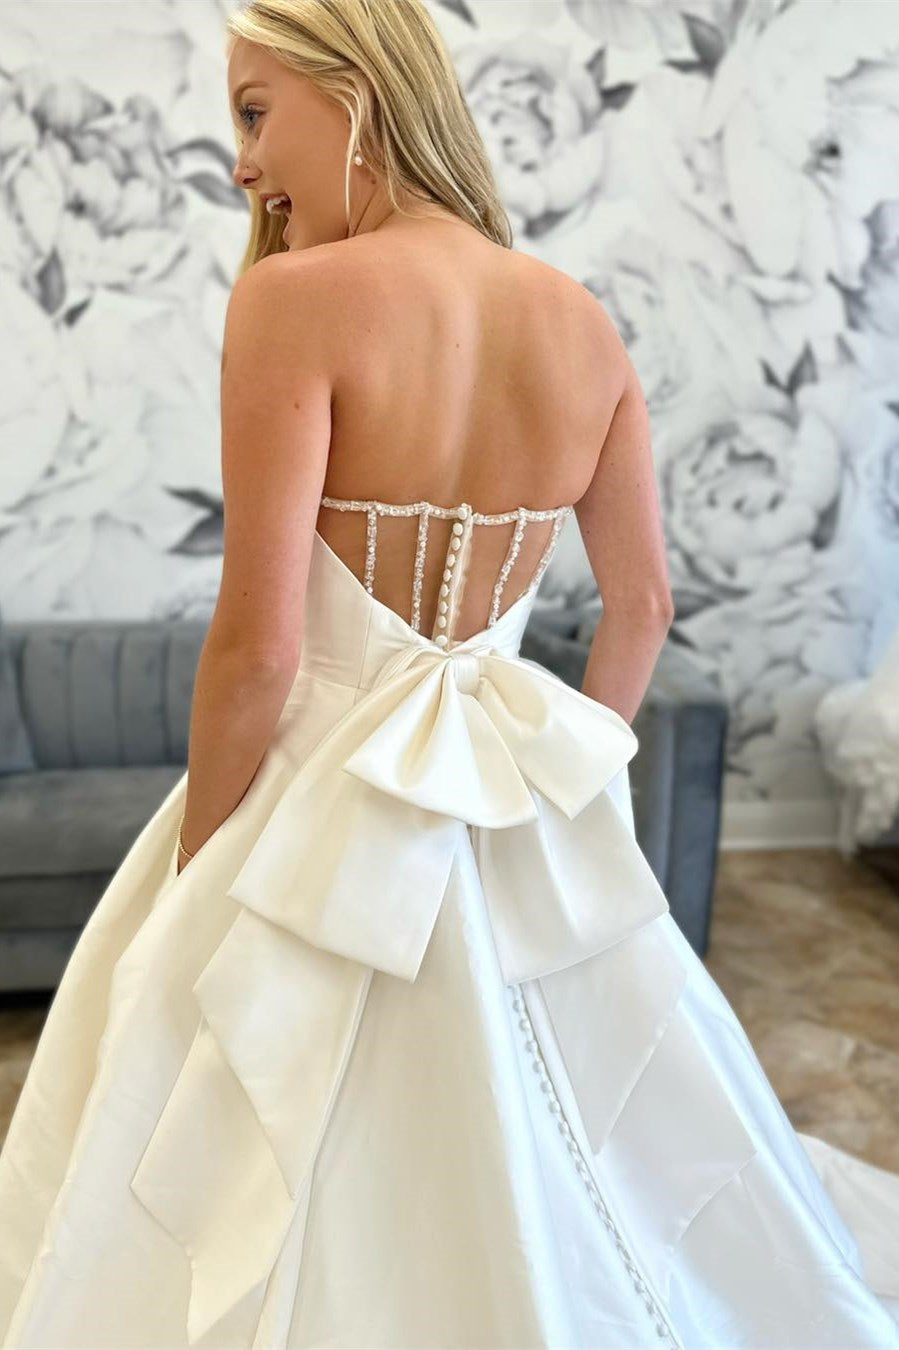 White Strapless Sheer Back Long Wedding Dress with Bow